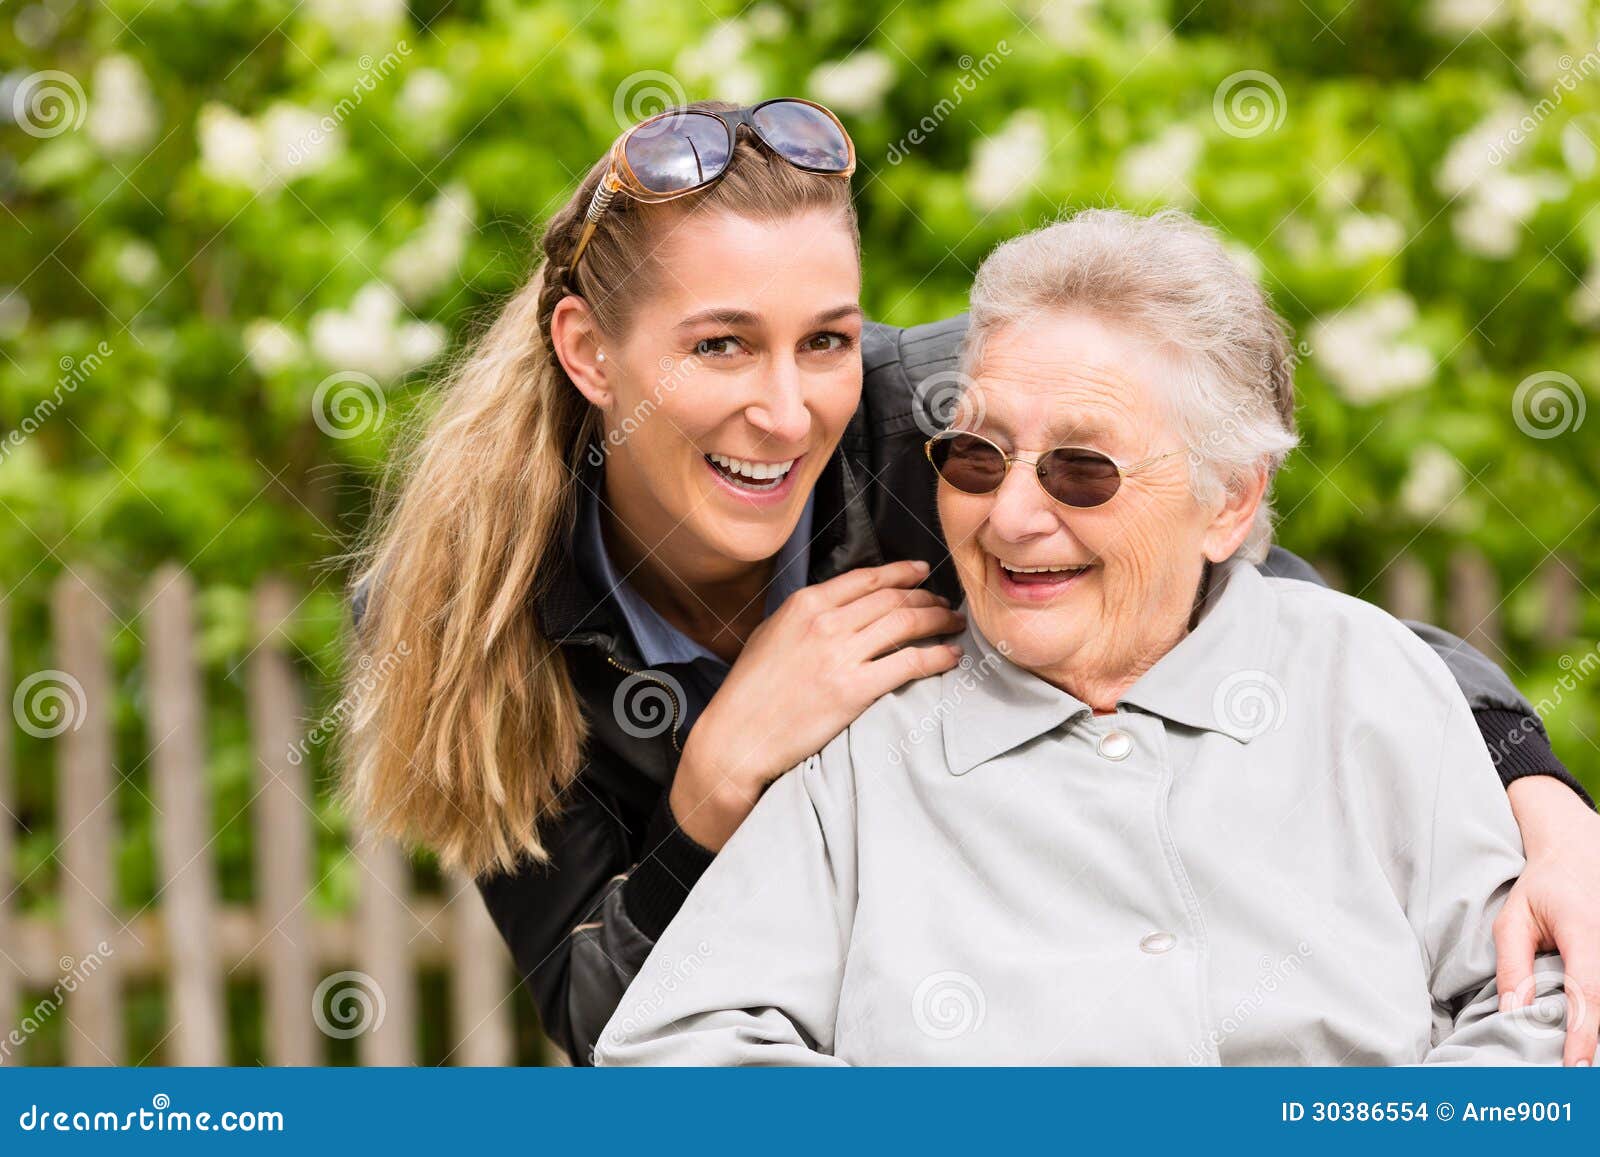 young woman is visiting her grandmother in nursing home